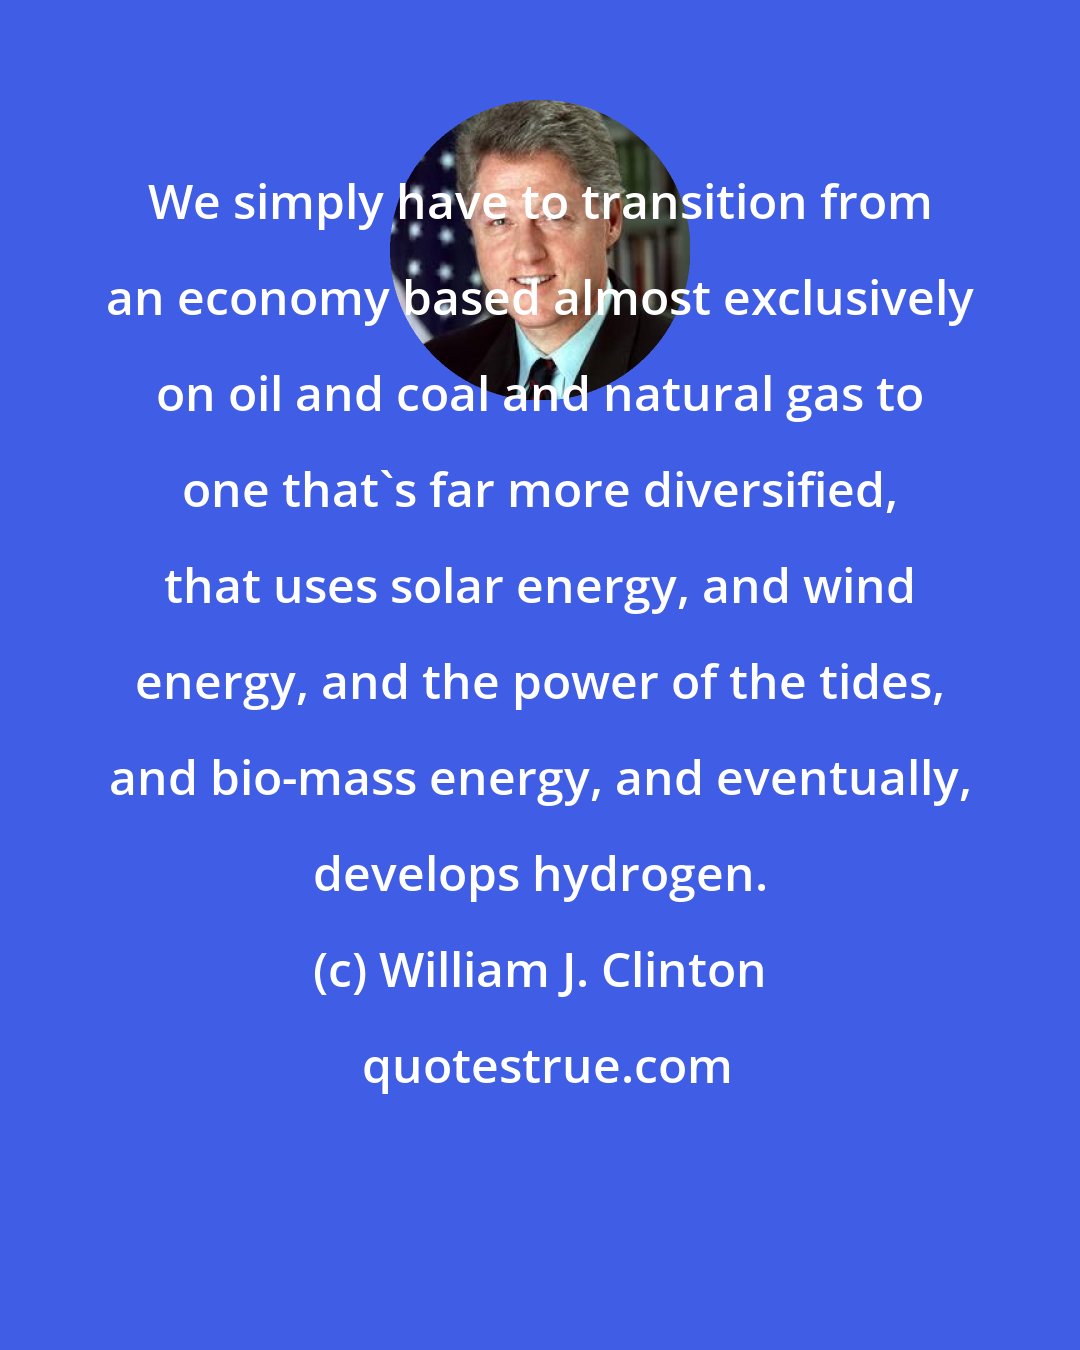 William J. Clinton: We simply have to transition from an economy based almost exclusively on oil and coal and natural gas to one that's far more diversified, that uses solar energy, and wind energy, and the power of the tides, and bio-mass energy, and eventually, develops hydrogen.